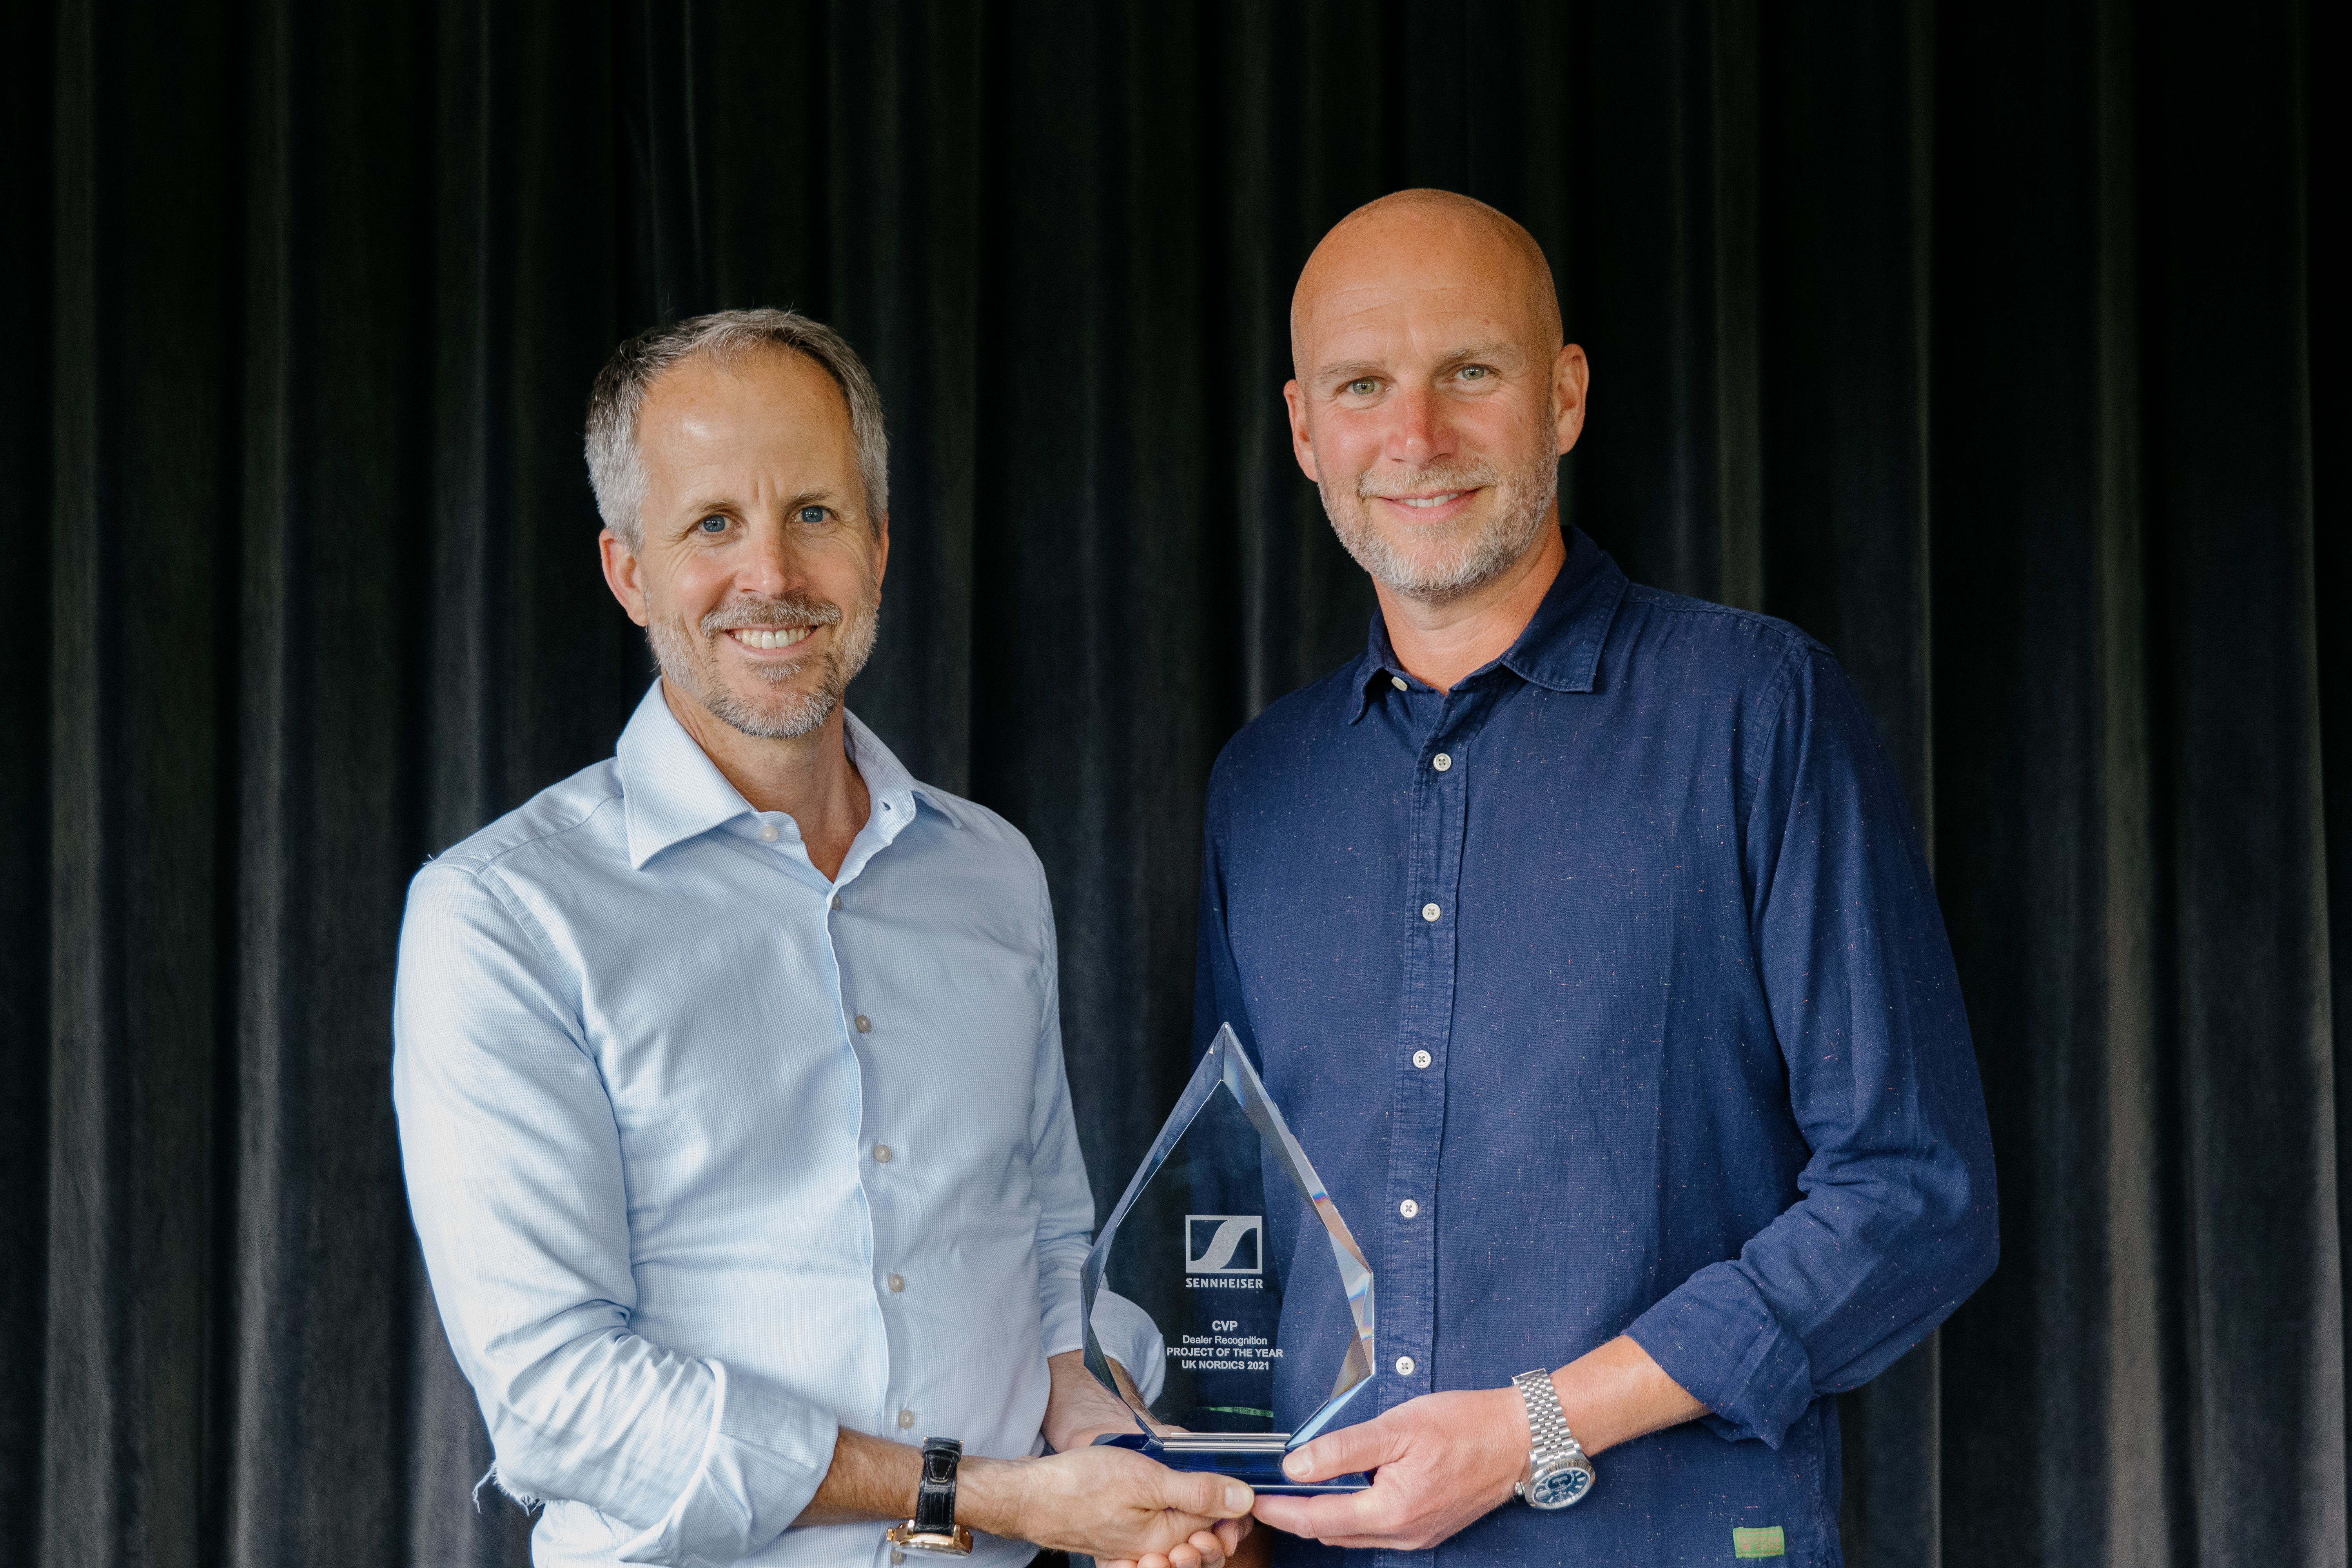 Dr Andreas Sennheiser (l.) hands over the sub-regional award for the UK-Nordics in the category “Project of the Year” to Jon Fry, CEO of CVP, for the group’s involvement with “180 The Strand”. CVP is outfitting various spaces in this cultural and creative centre with Sennheiser Digital 6000 wireless microphones and Neumann monitors